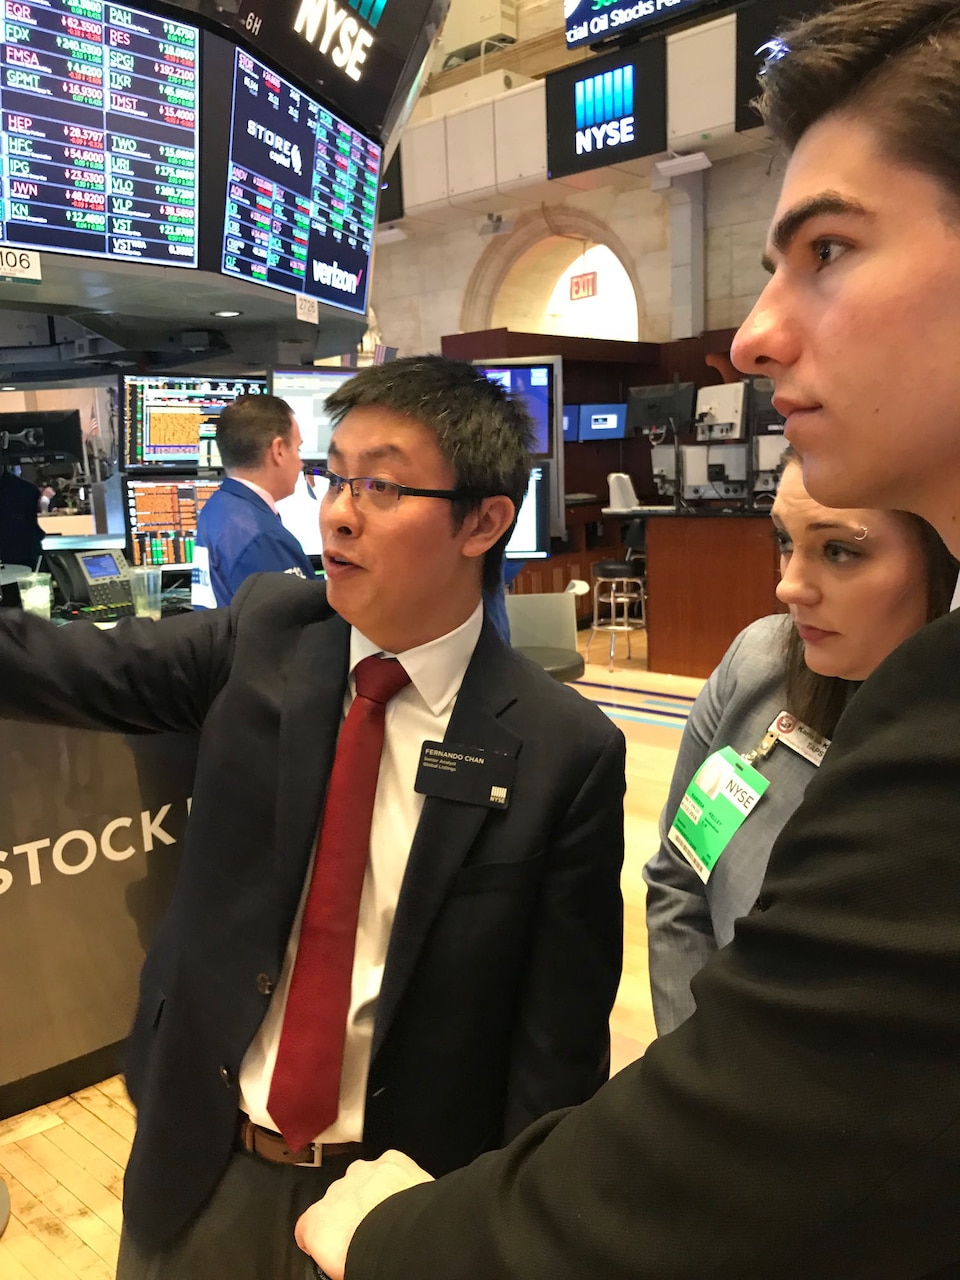 A New York Stock Exchange executive explains operations to two Gold Star children at the opening bell in New York City, April 12, 2018. The Tragedy Assistance Program for Survivors provided the opportunity for young adults who lost a parent who was serving on active duty in the military to meet with professionals in careers they hope to pursue. Courtesy photo